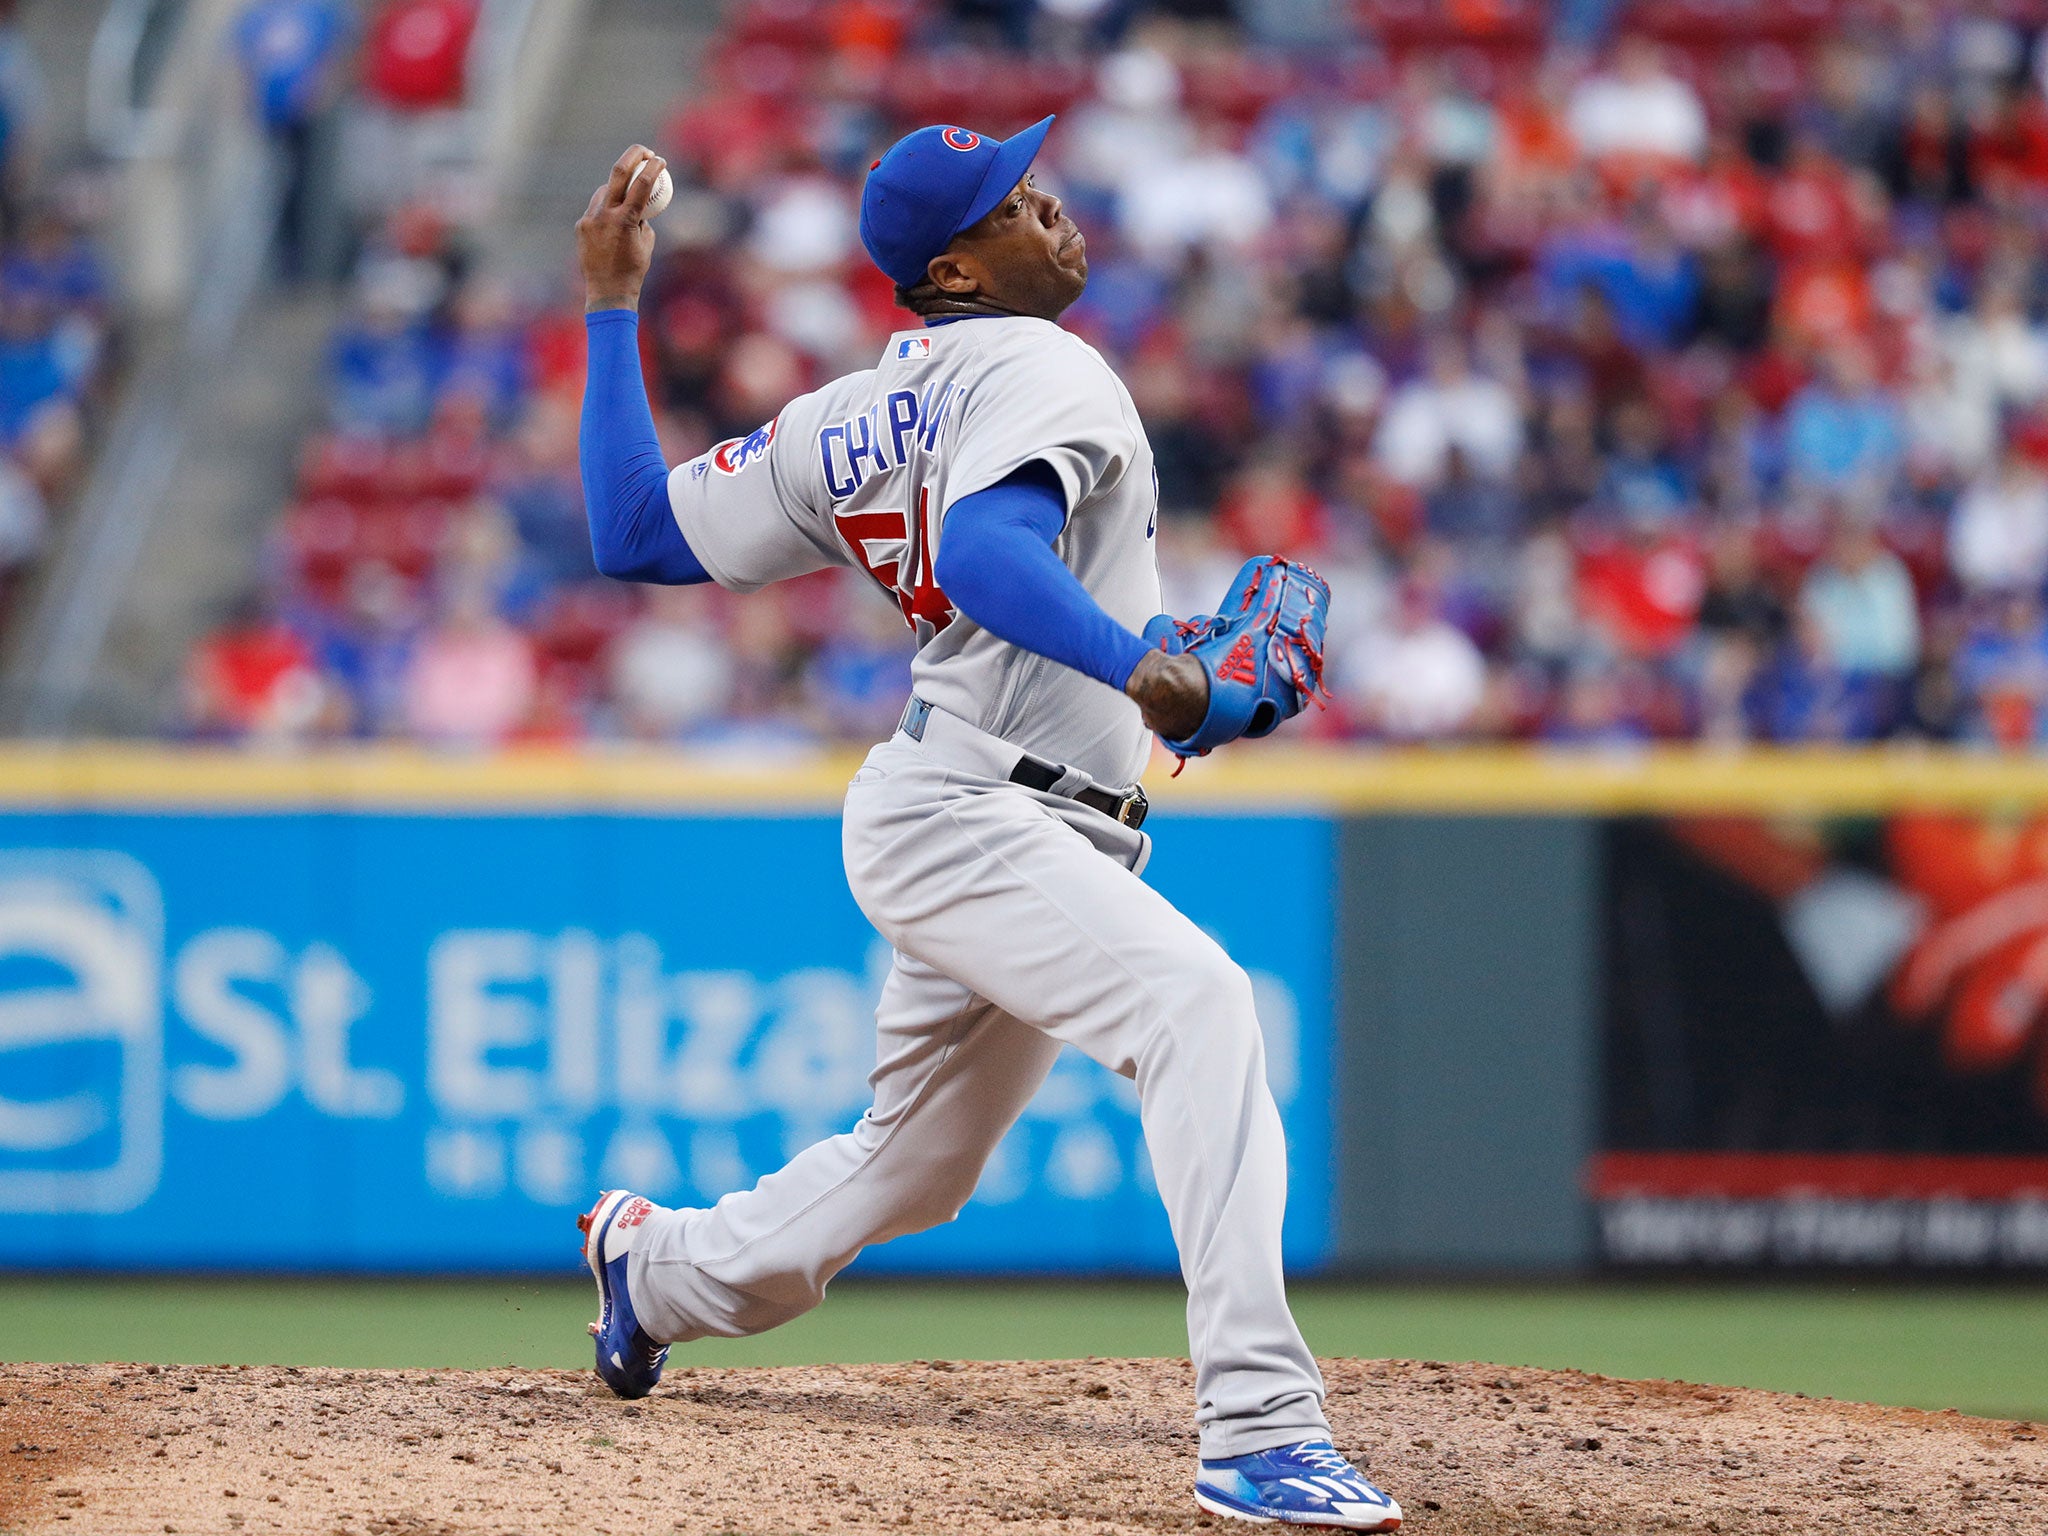 Aroldis Chapman of the Chicago Cubs is the fastest pitcher in MLB history